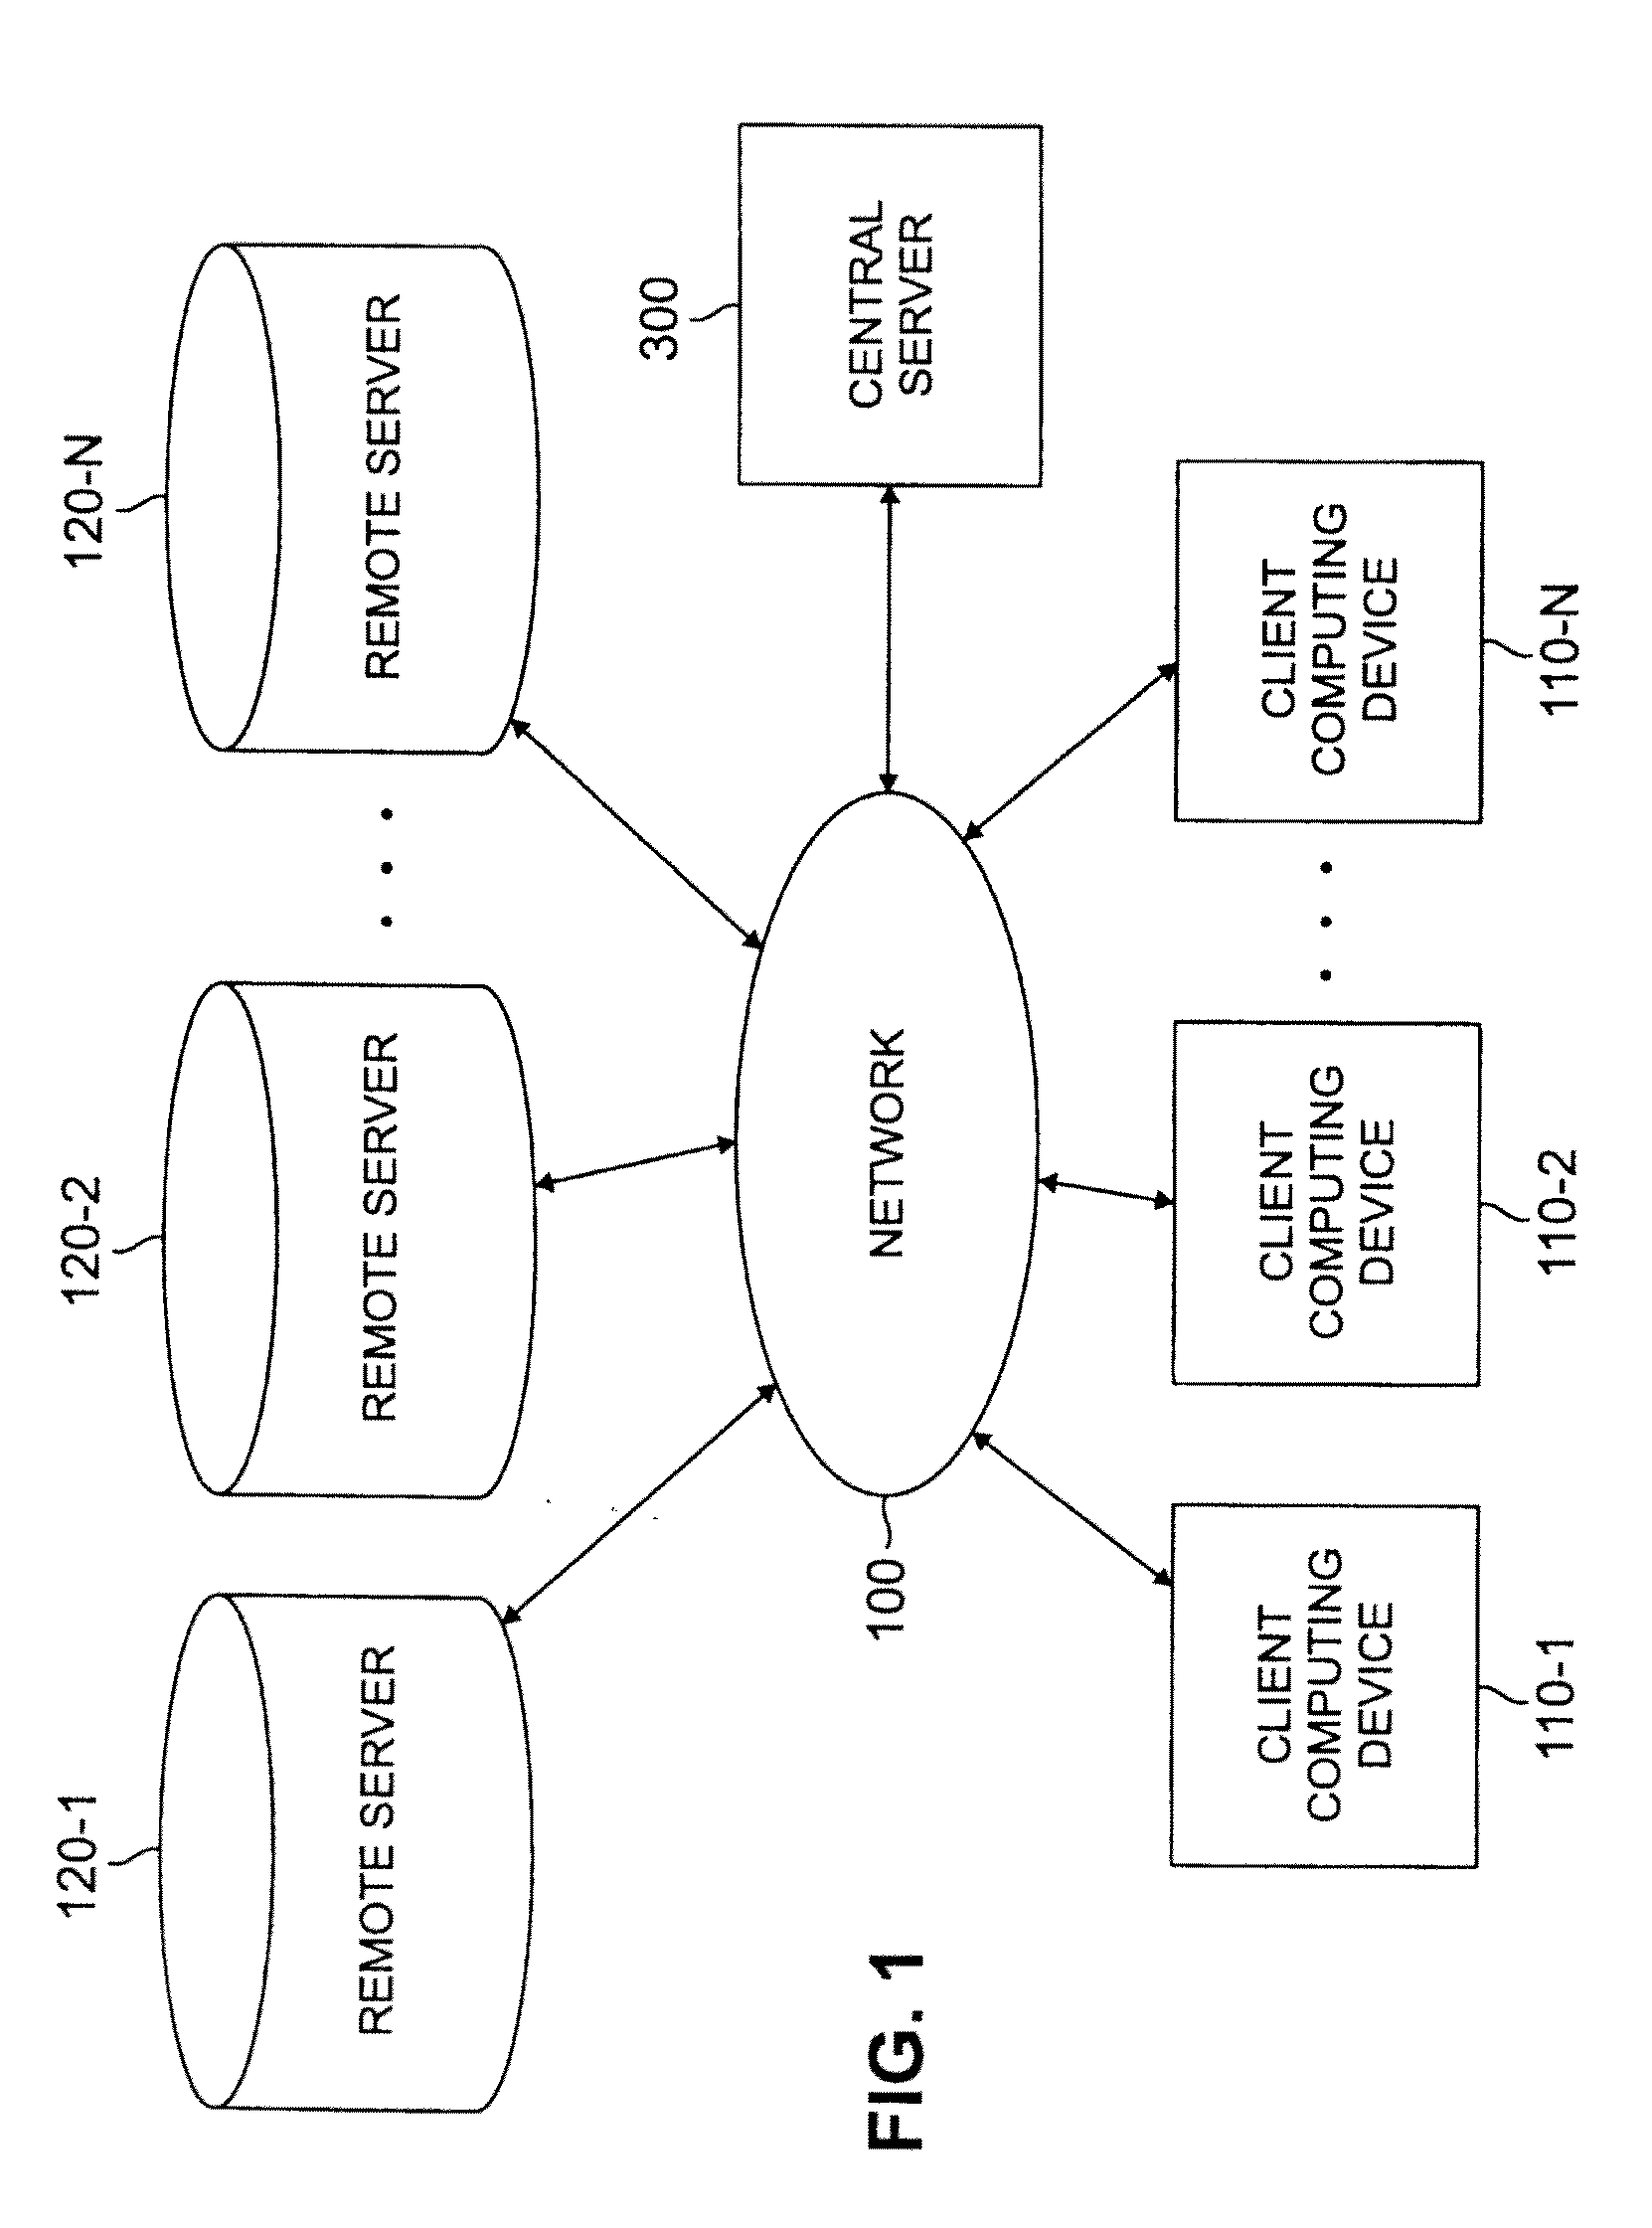 Method and Apparatus for Generating a Graphical Interface to Enable Local or Remote Access to an Application Having a Command Line Interface